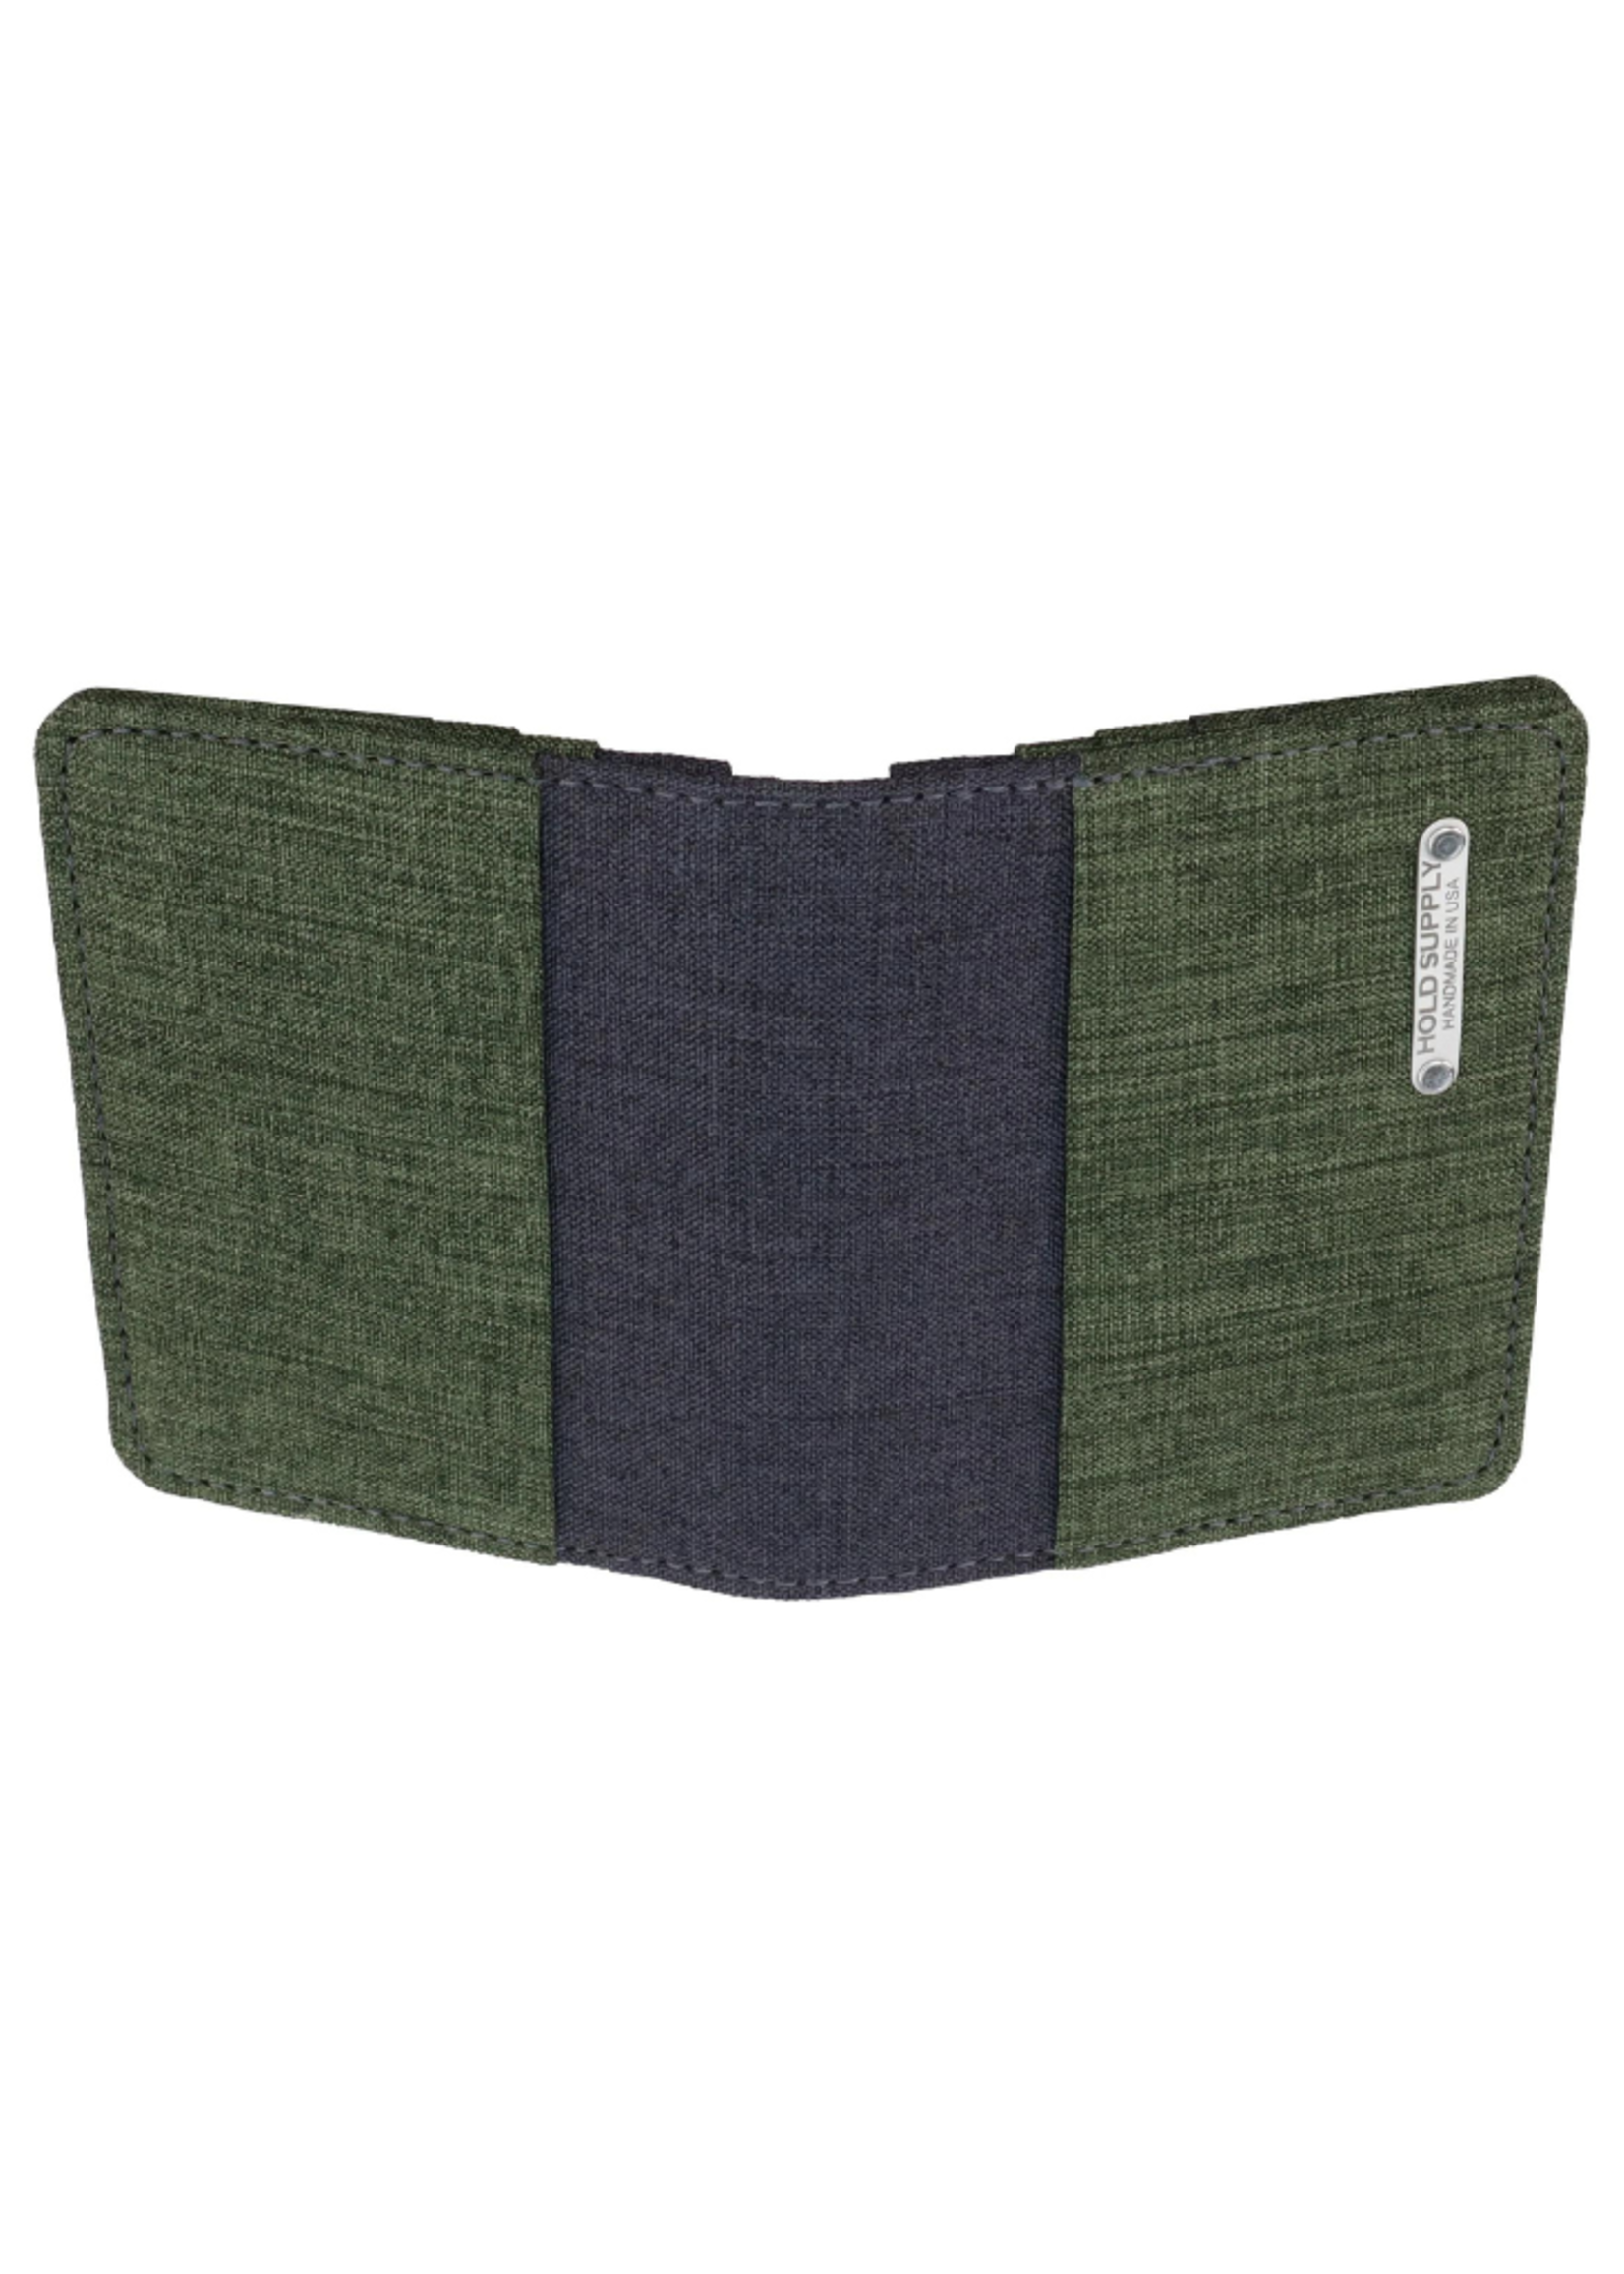 Hold Supply Co Green / Gray Canvas Vertical Bifold Card & Cash Wallet